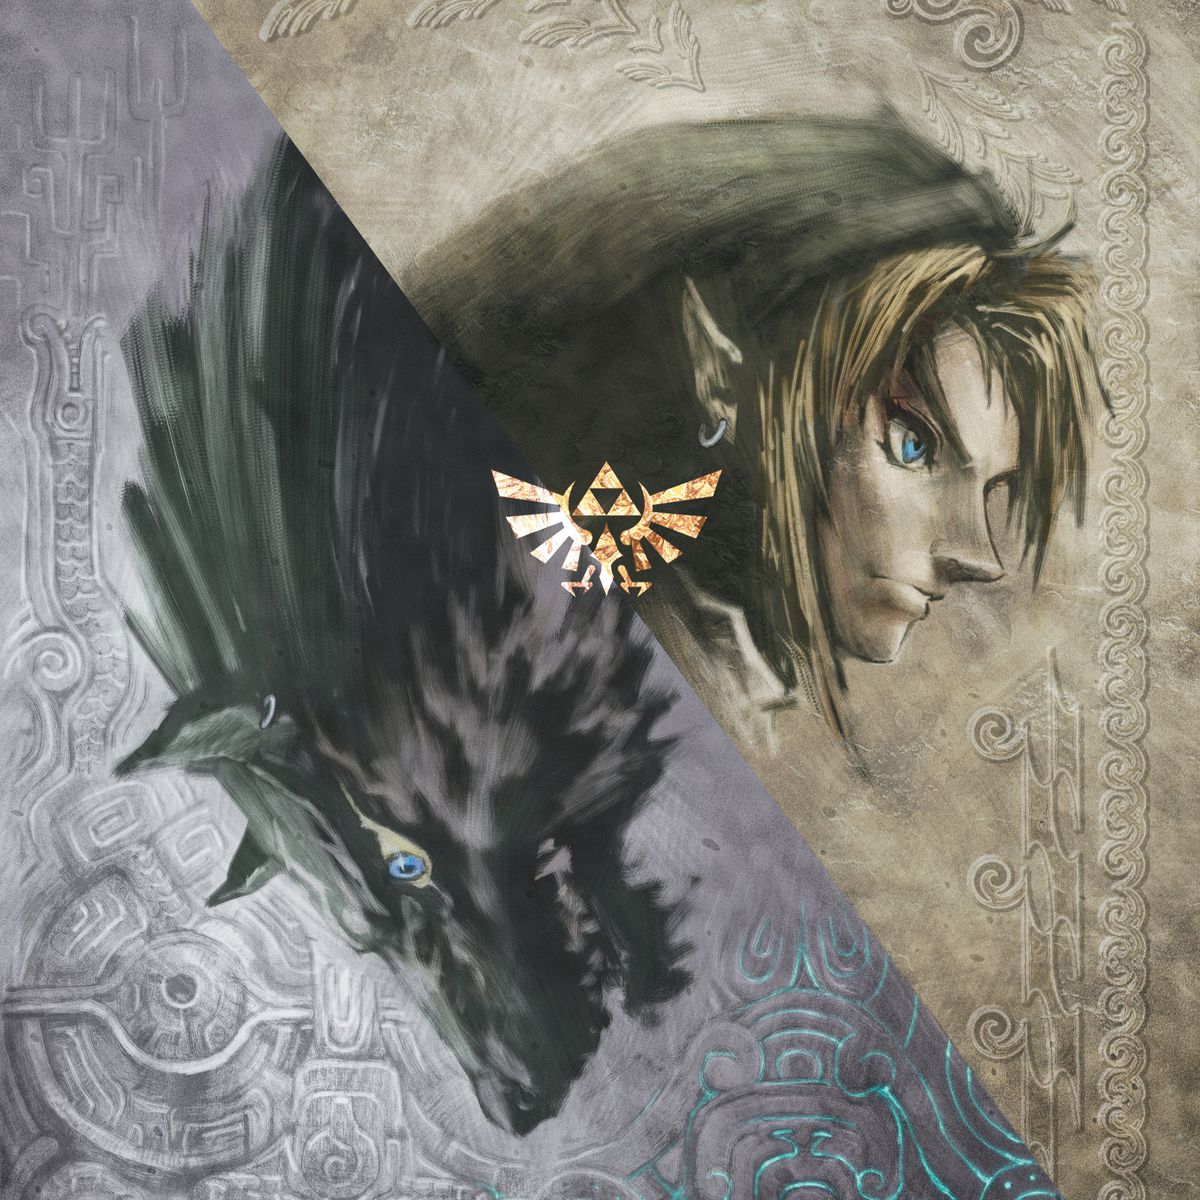 Artwork showing Link’s head and that of a fierce wolf divided by a diagonal line with a Triforce logo in the center